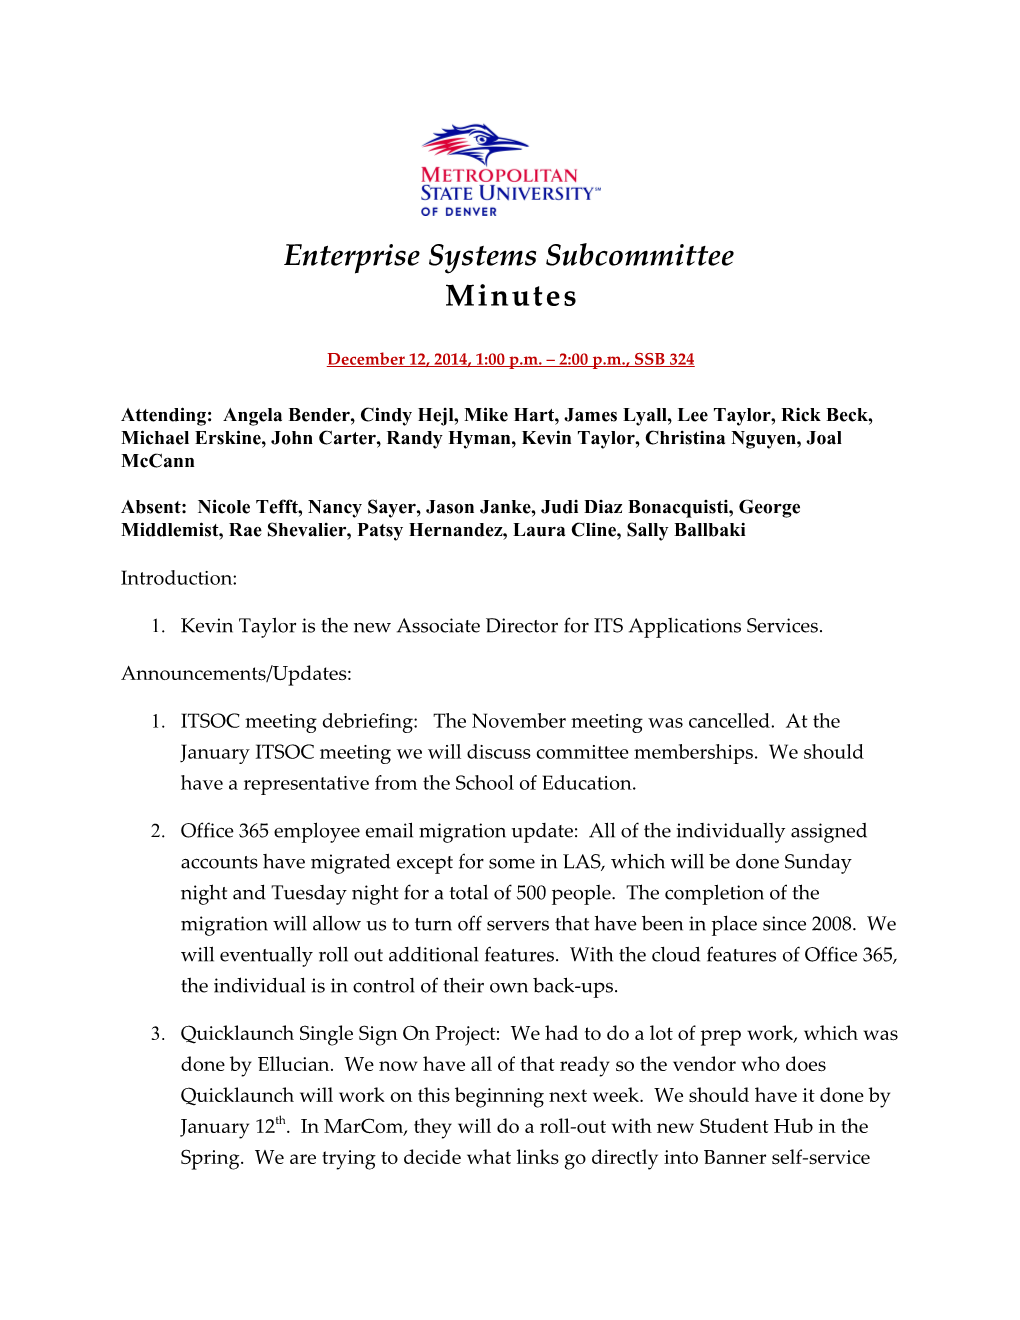 Enterprise Systems Subcommittee